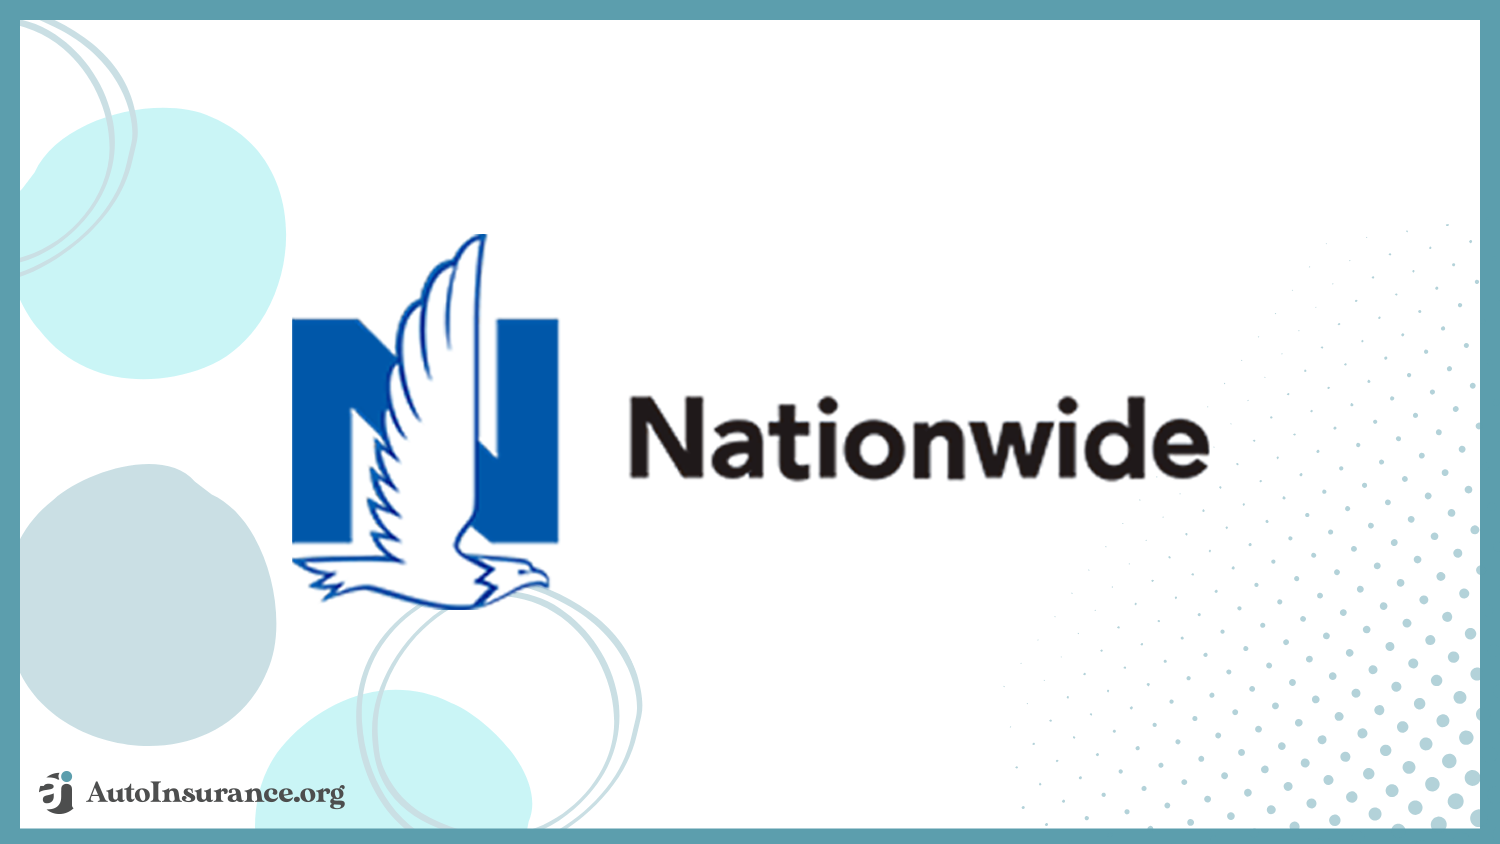 Nationwide: Best Auto Insurance for Wheelchair-Accessible Vehicles